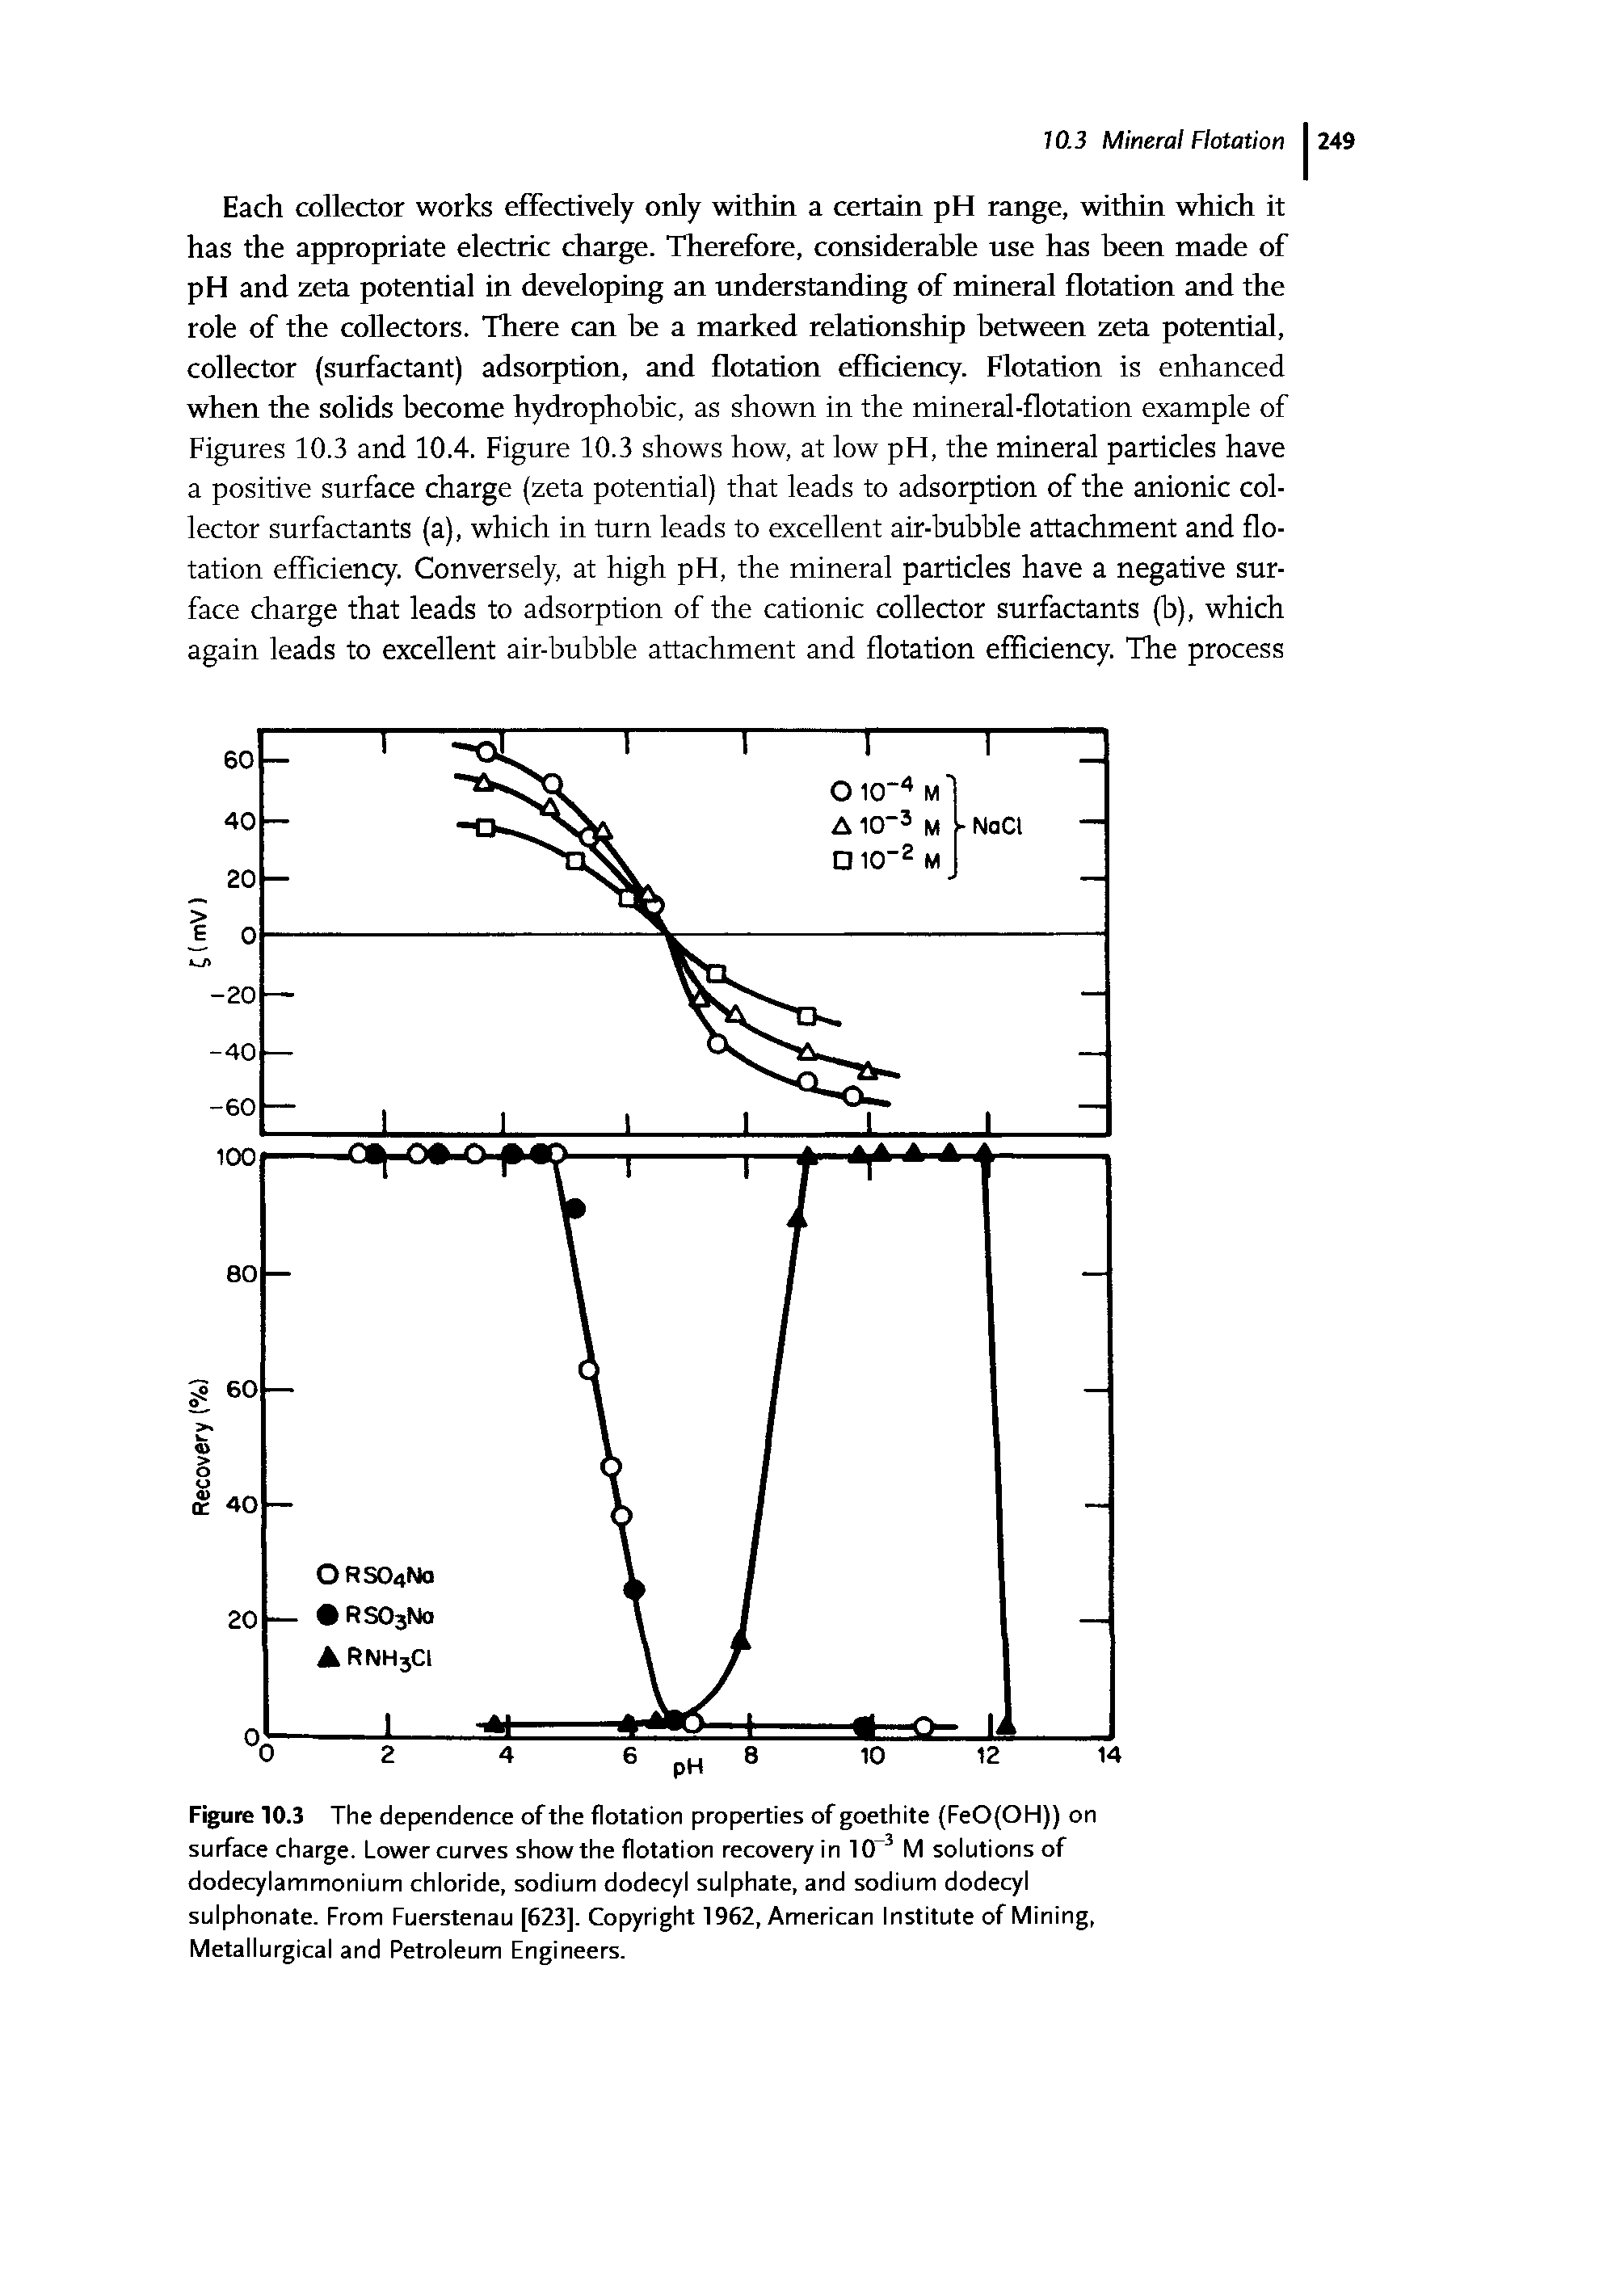 Figure 10.3 The dependence of the flotation properties of goethite (FeO(OH)) on surface charge. Lower curves show the flotation recoveryin 10 5 M solutions of dodecylammonium chloride, sodium dodecyl sulphate, and sodium dodecyl sulphonate. From Fuerstenau [623], Copyright 1962, American Institute of Mining, Metallurgical and Petroleum Engineers.